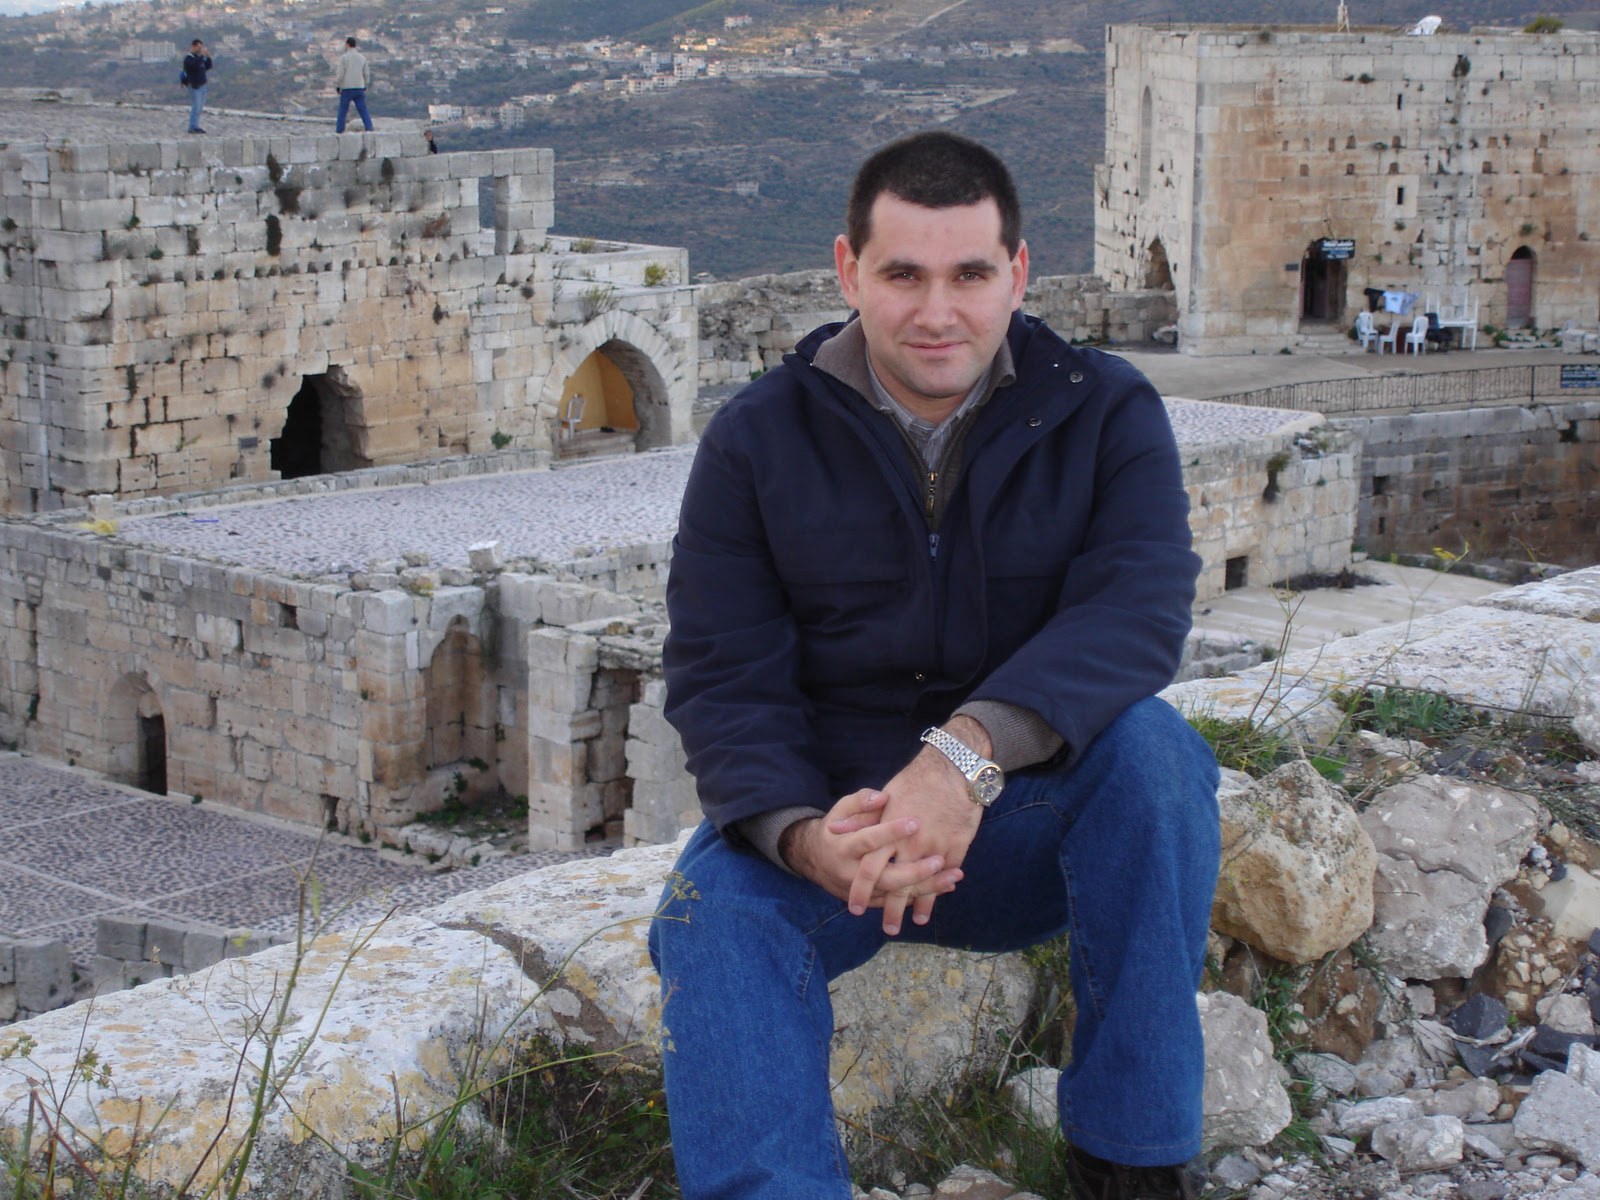 Aboud Dandachi at the 12th Century Krak des Chevaliers in Homs. In 2013, the Syrian government bombed this site, destroying what had been the world's best preserved Crusader Castle. Photo courtesy